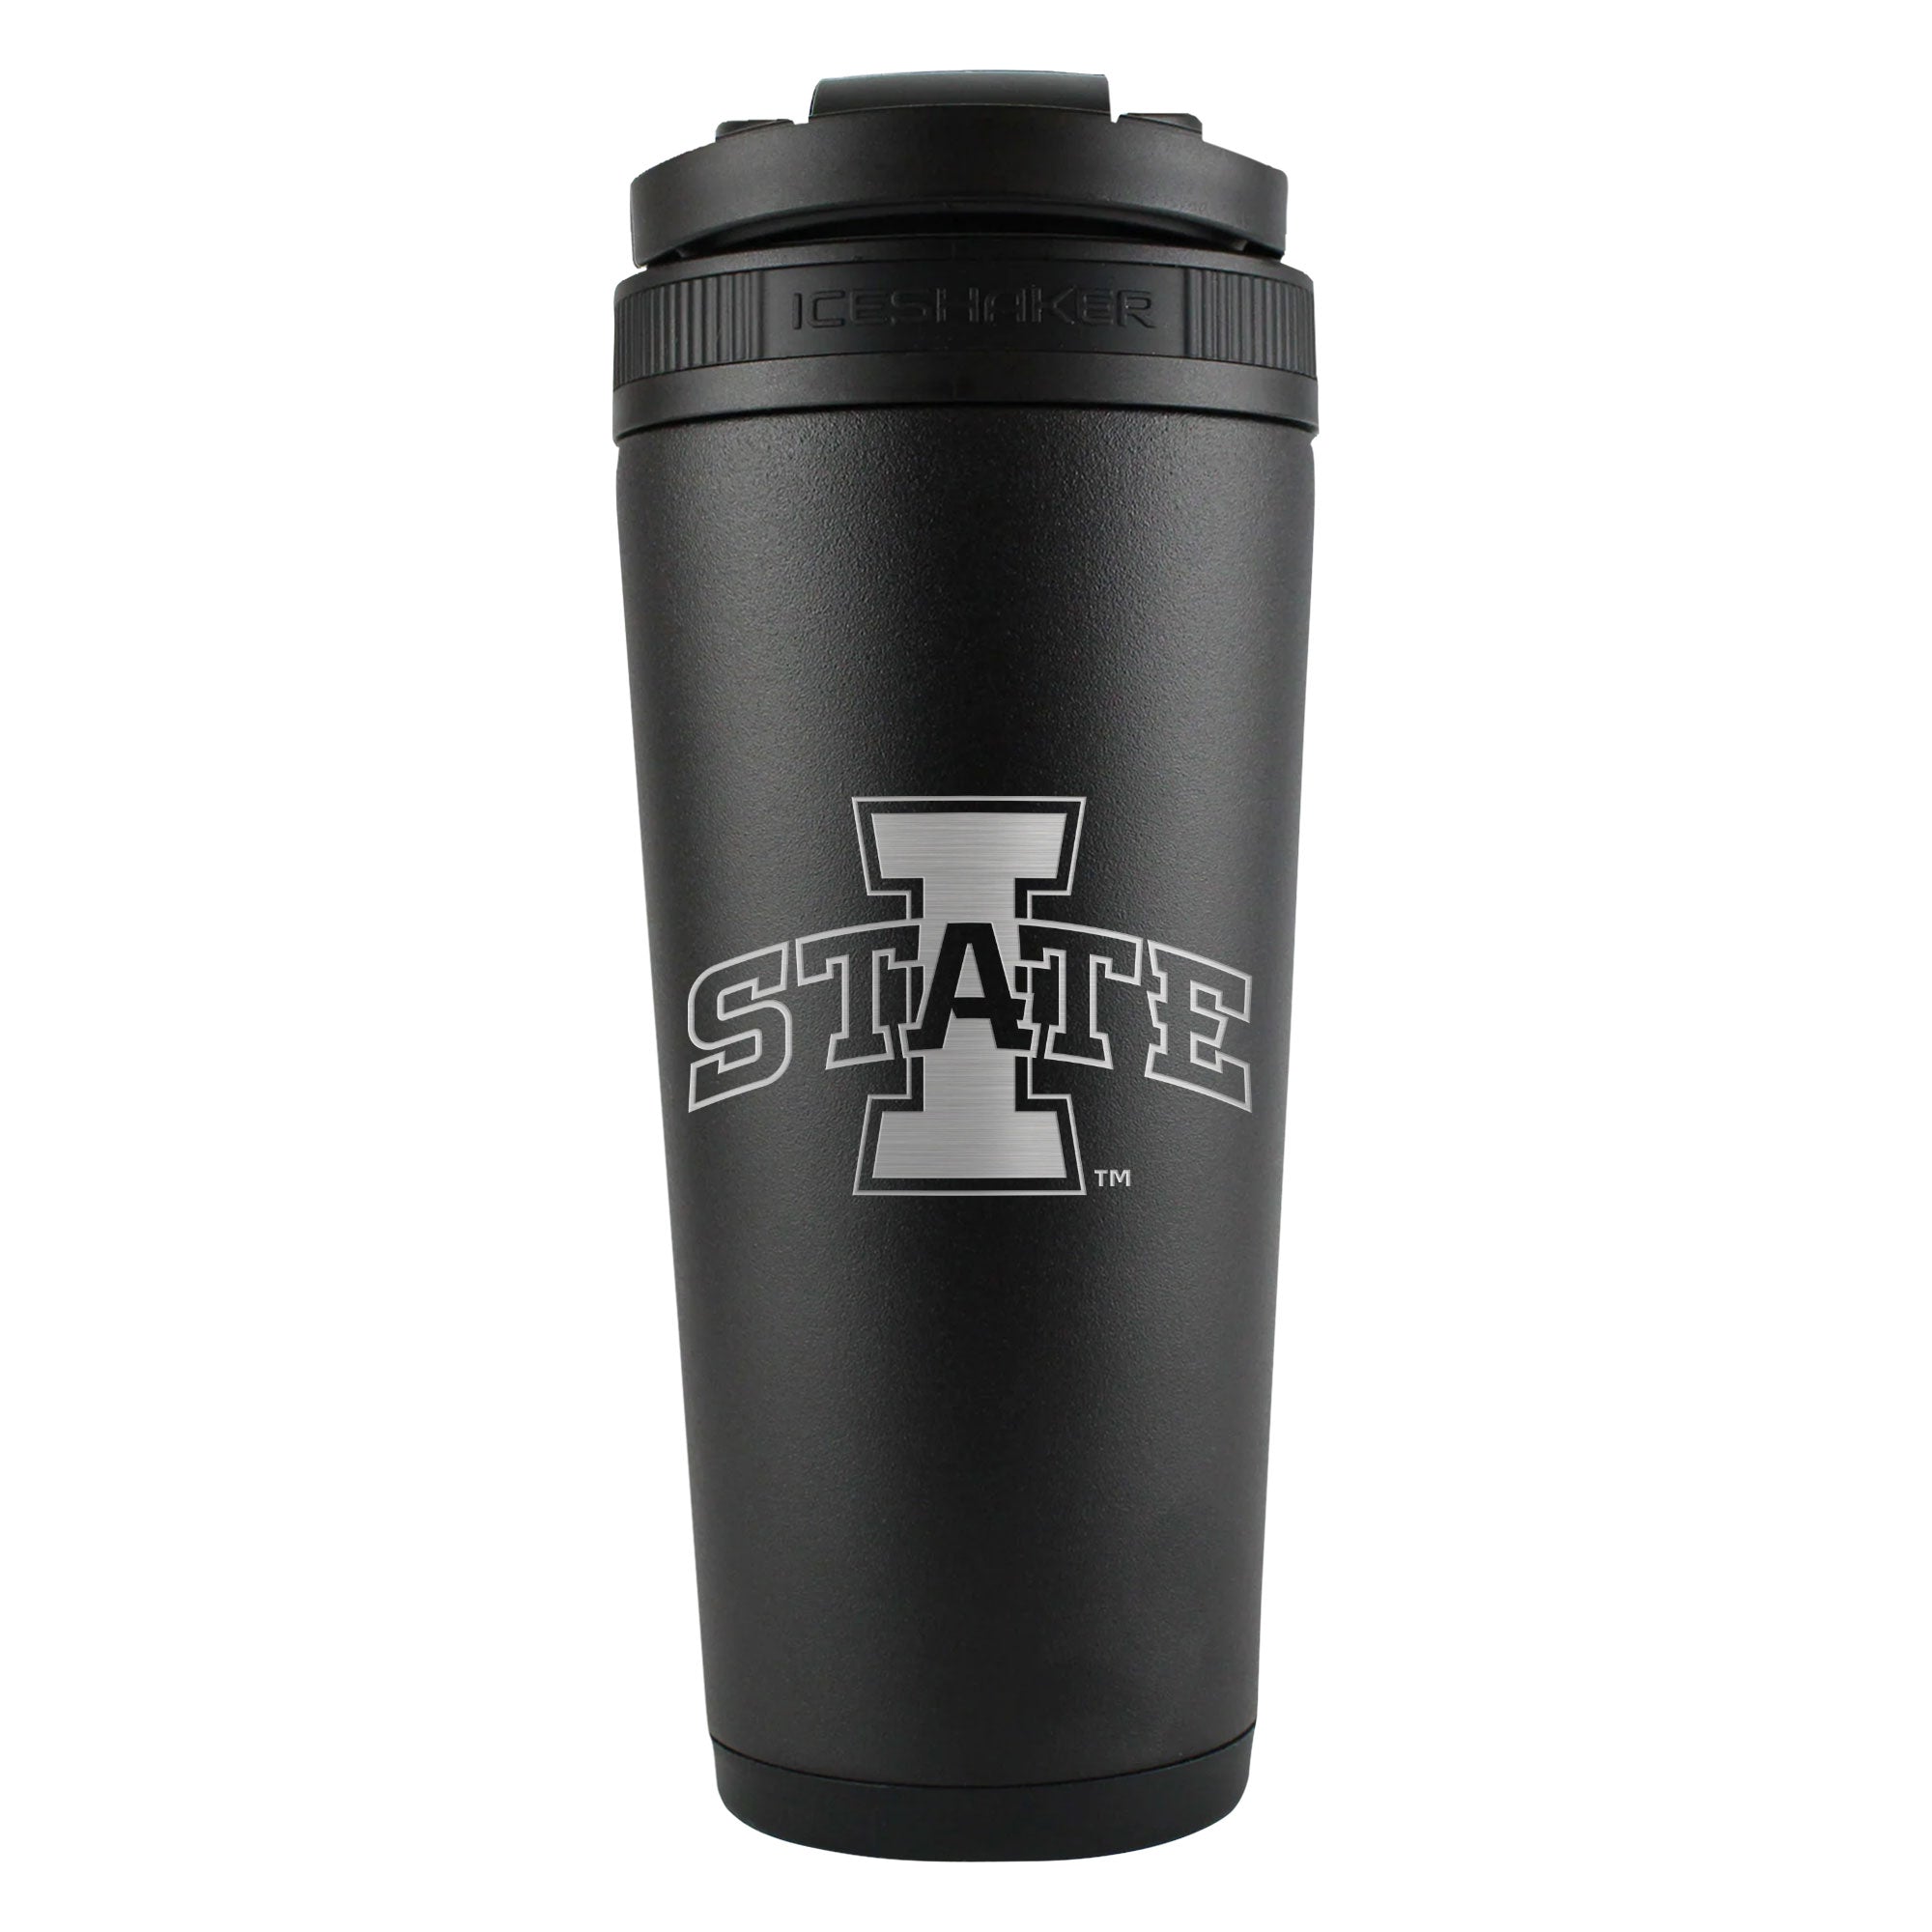 Officially Licensed Iowa State University 26oz Ice Shaker - Black